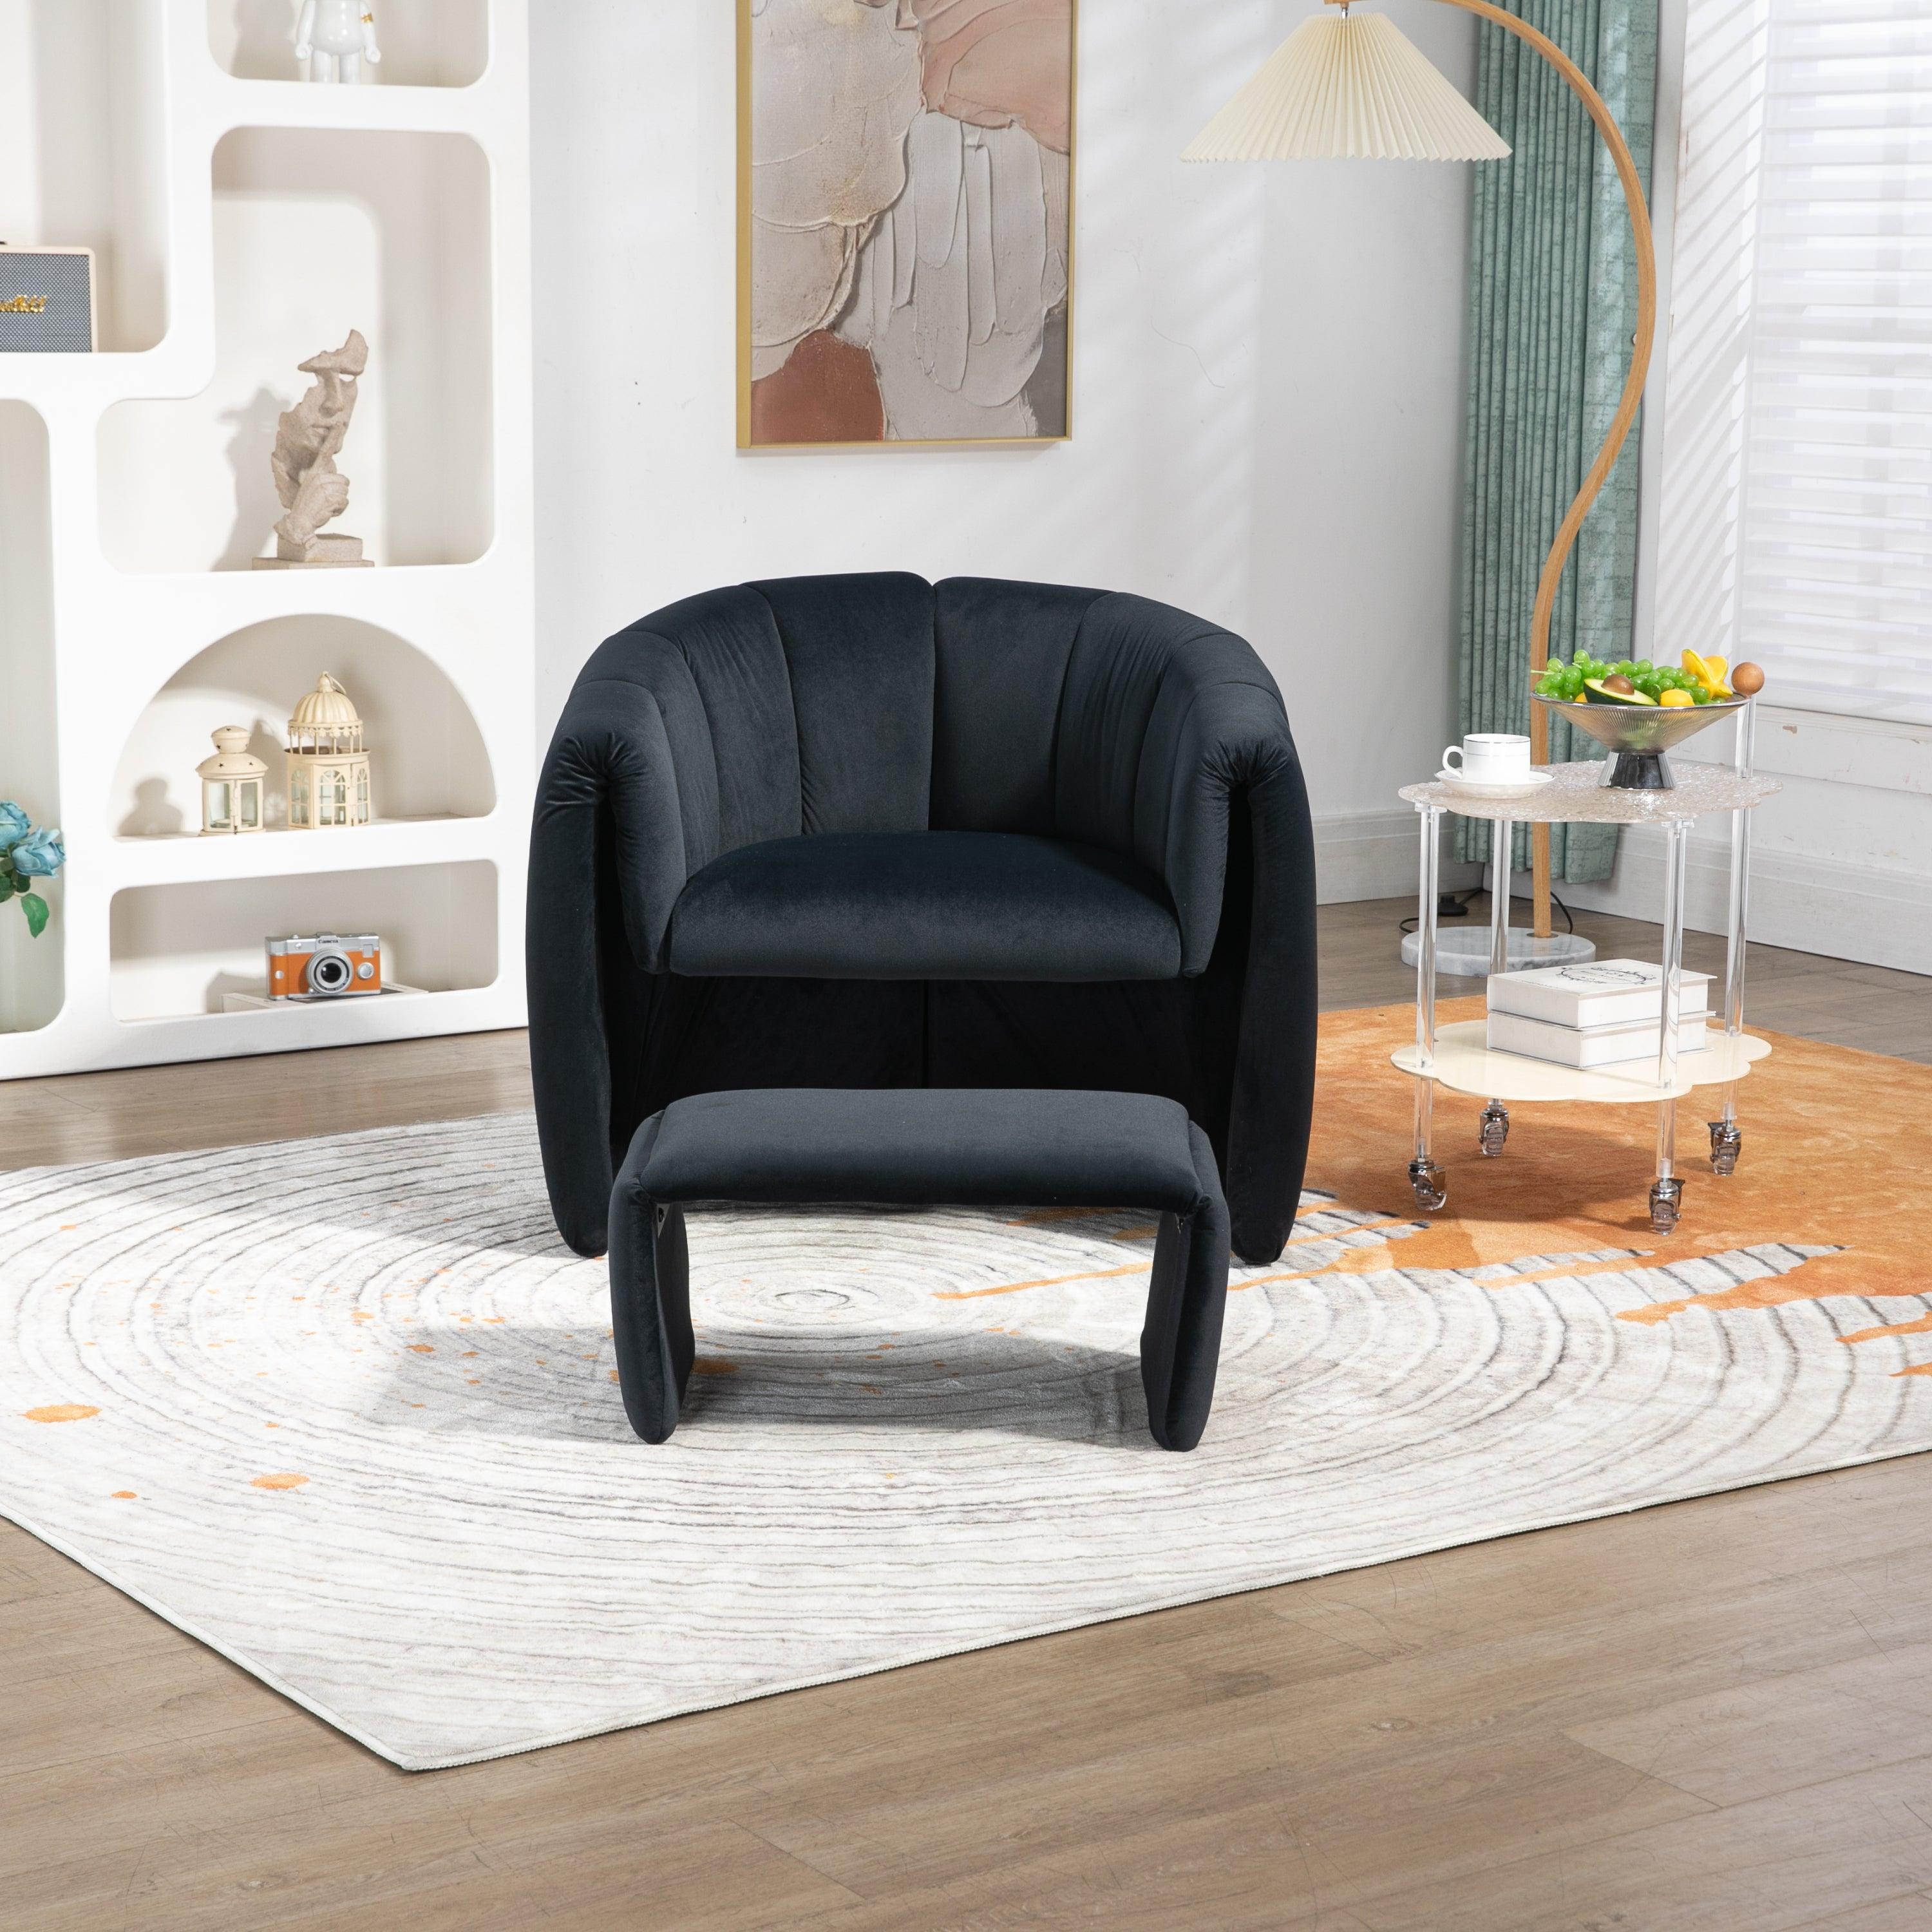 🆓🚛 Yungee Mid Century Modern Barrel Accent Chair With Ottoman Set, Black